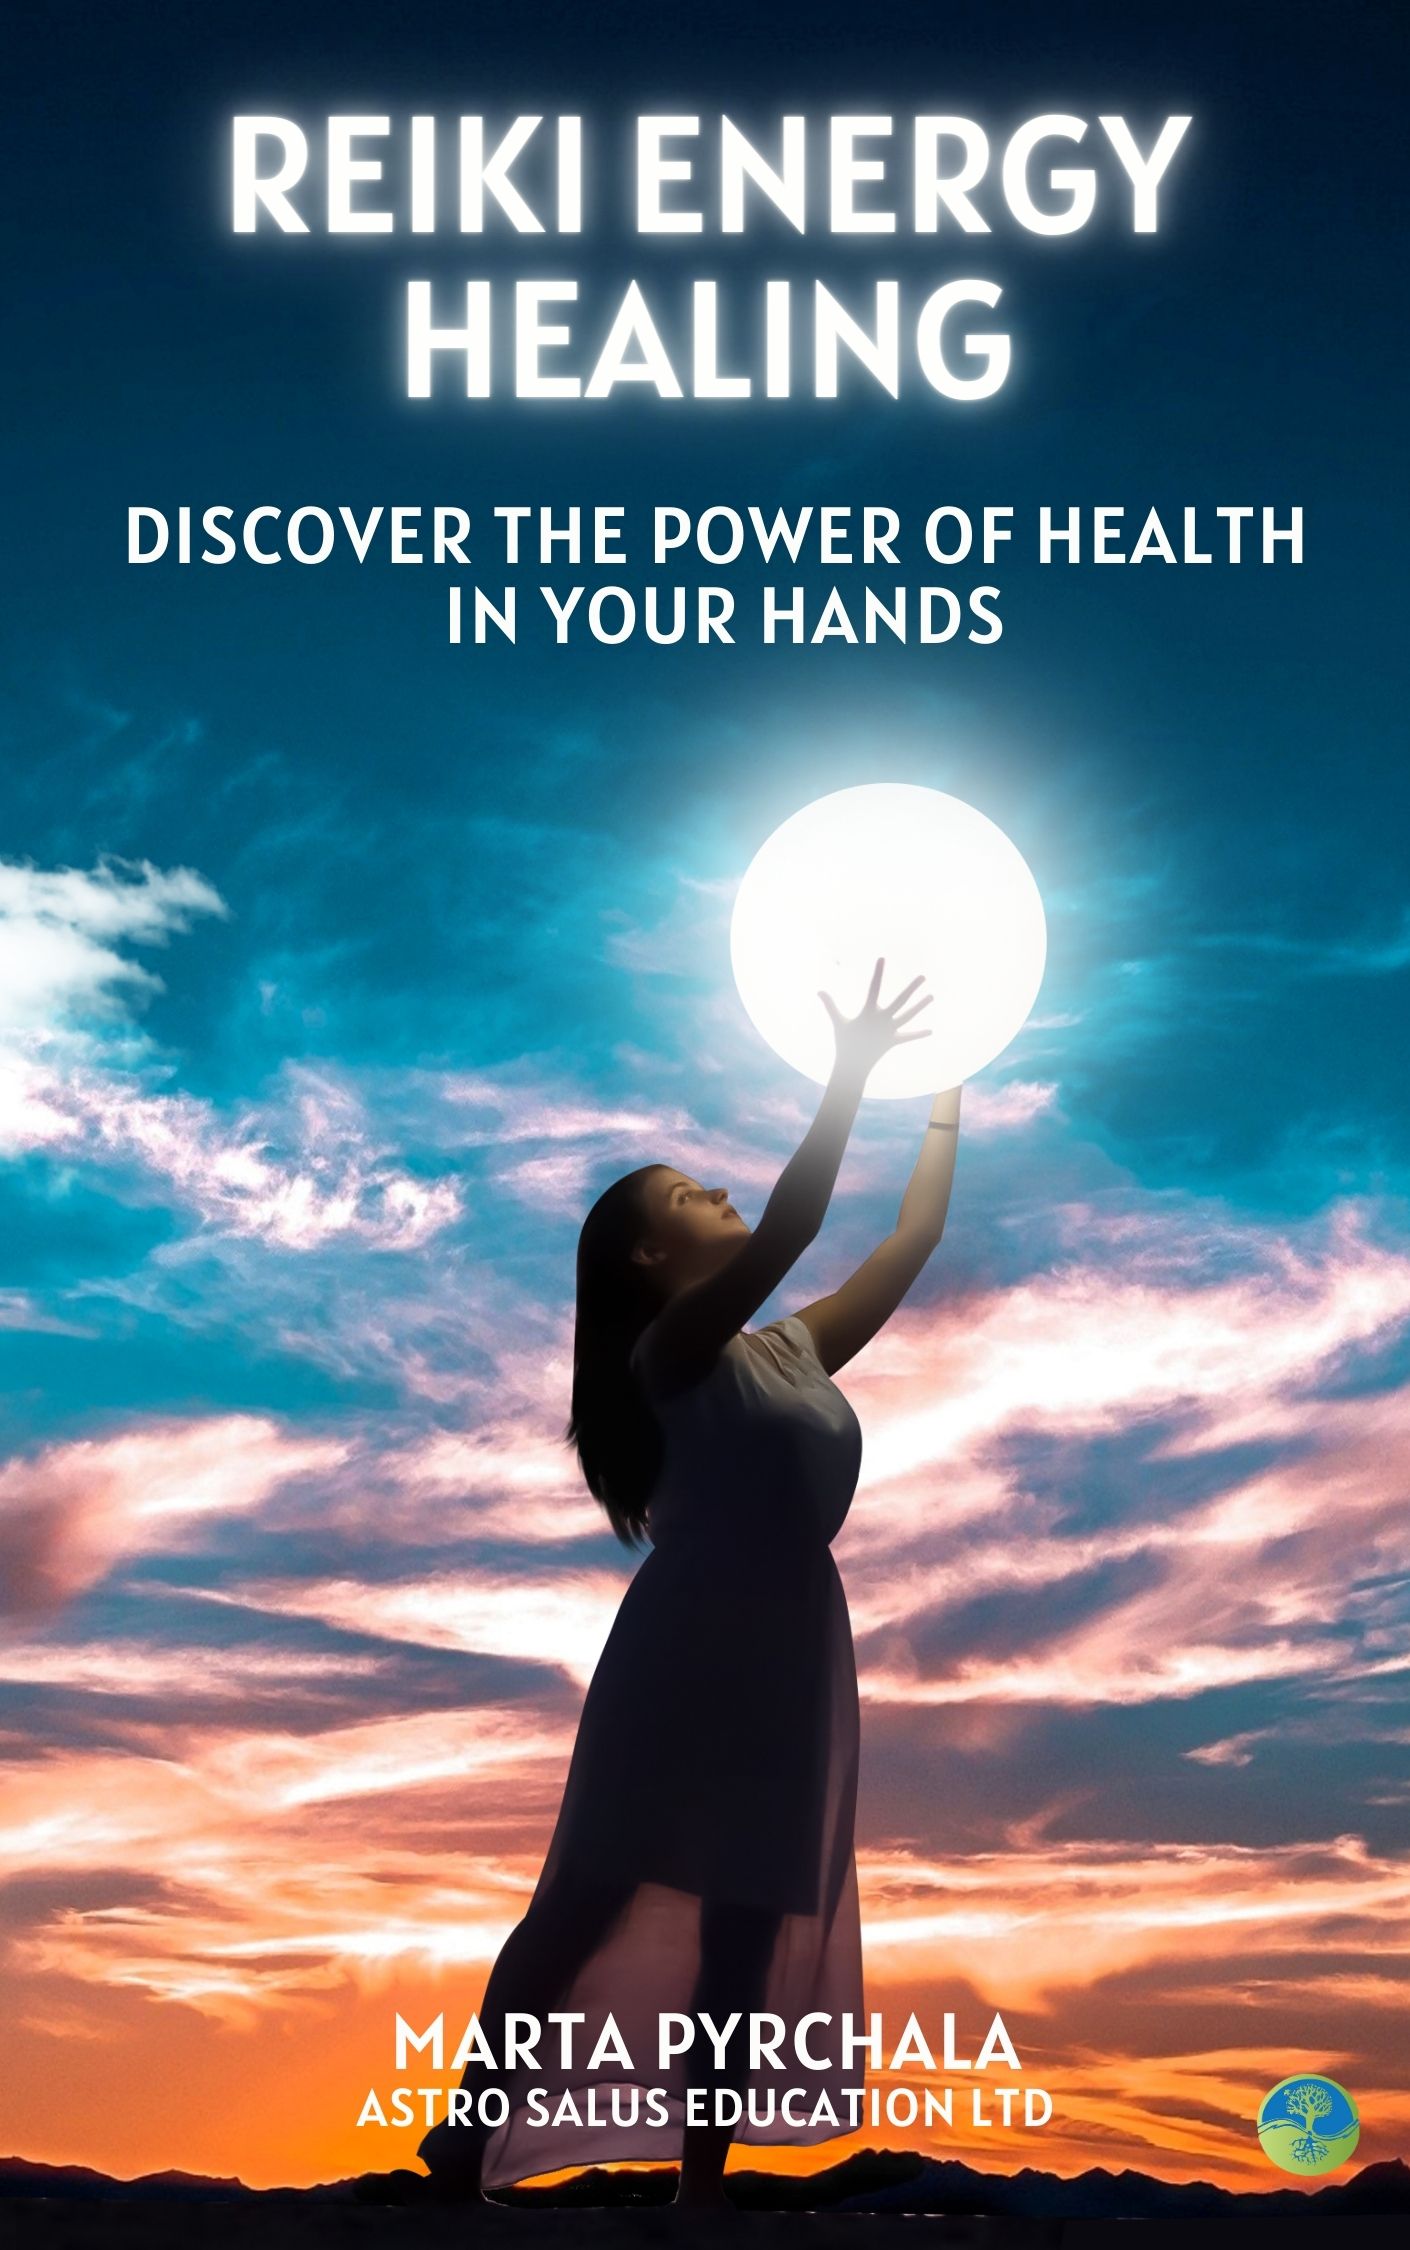 Reiki energy healing. Discover the power of health in your hands